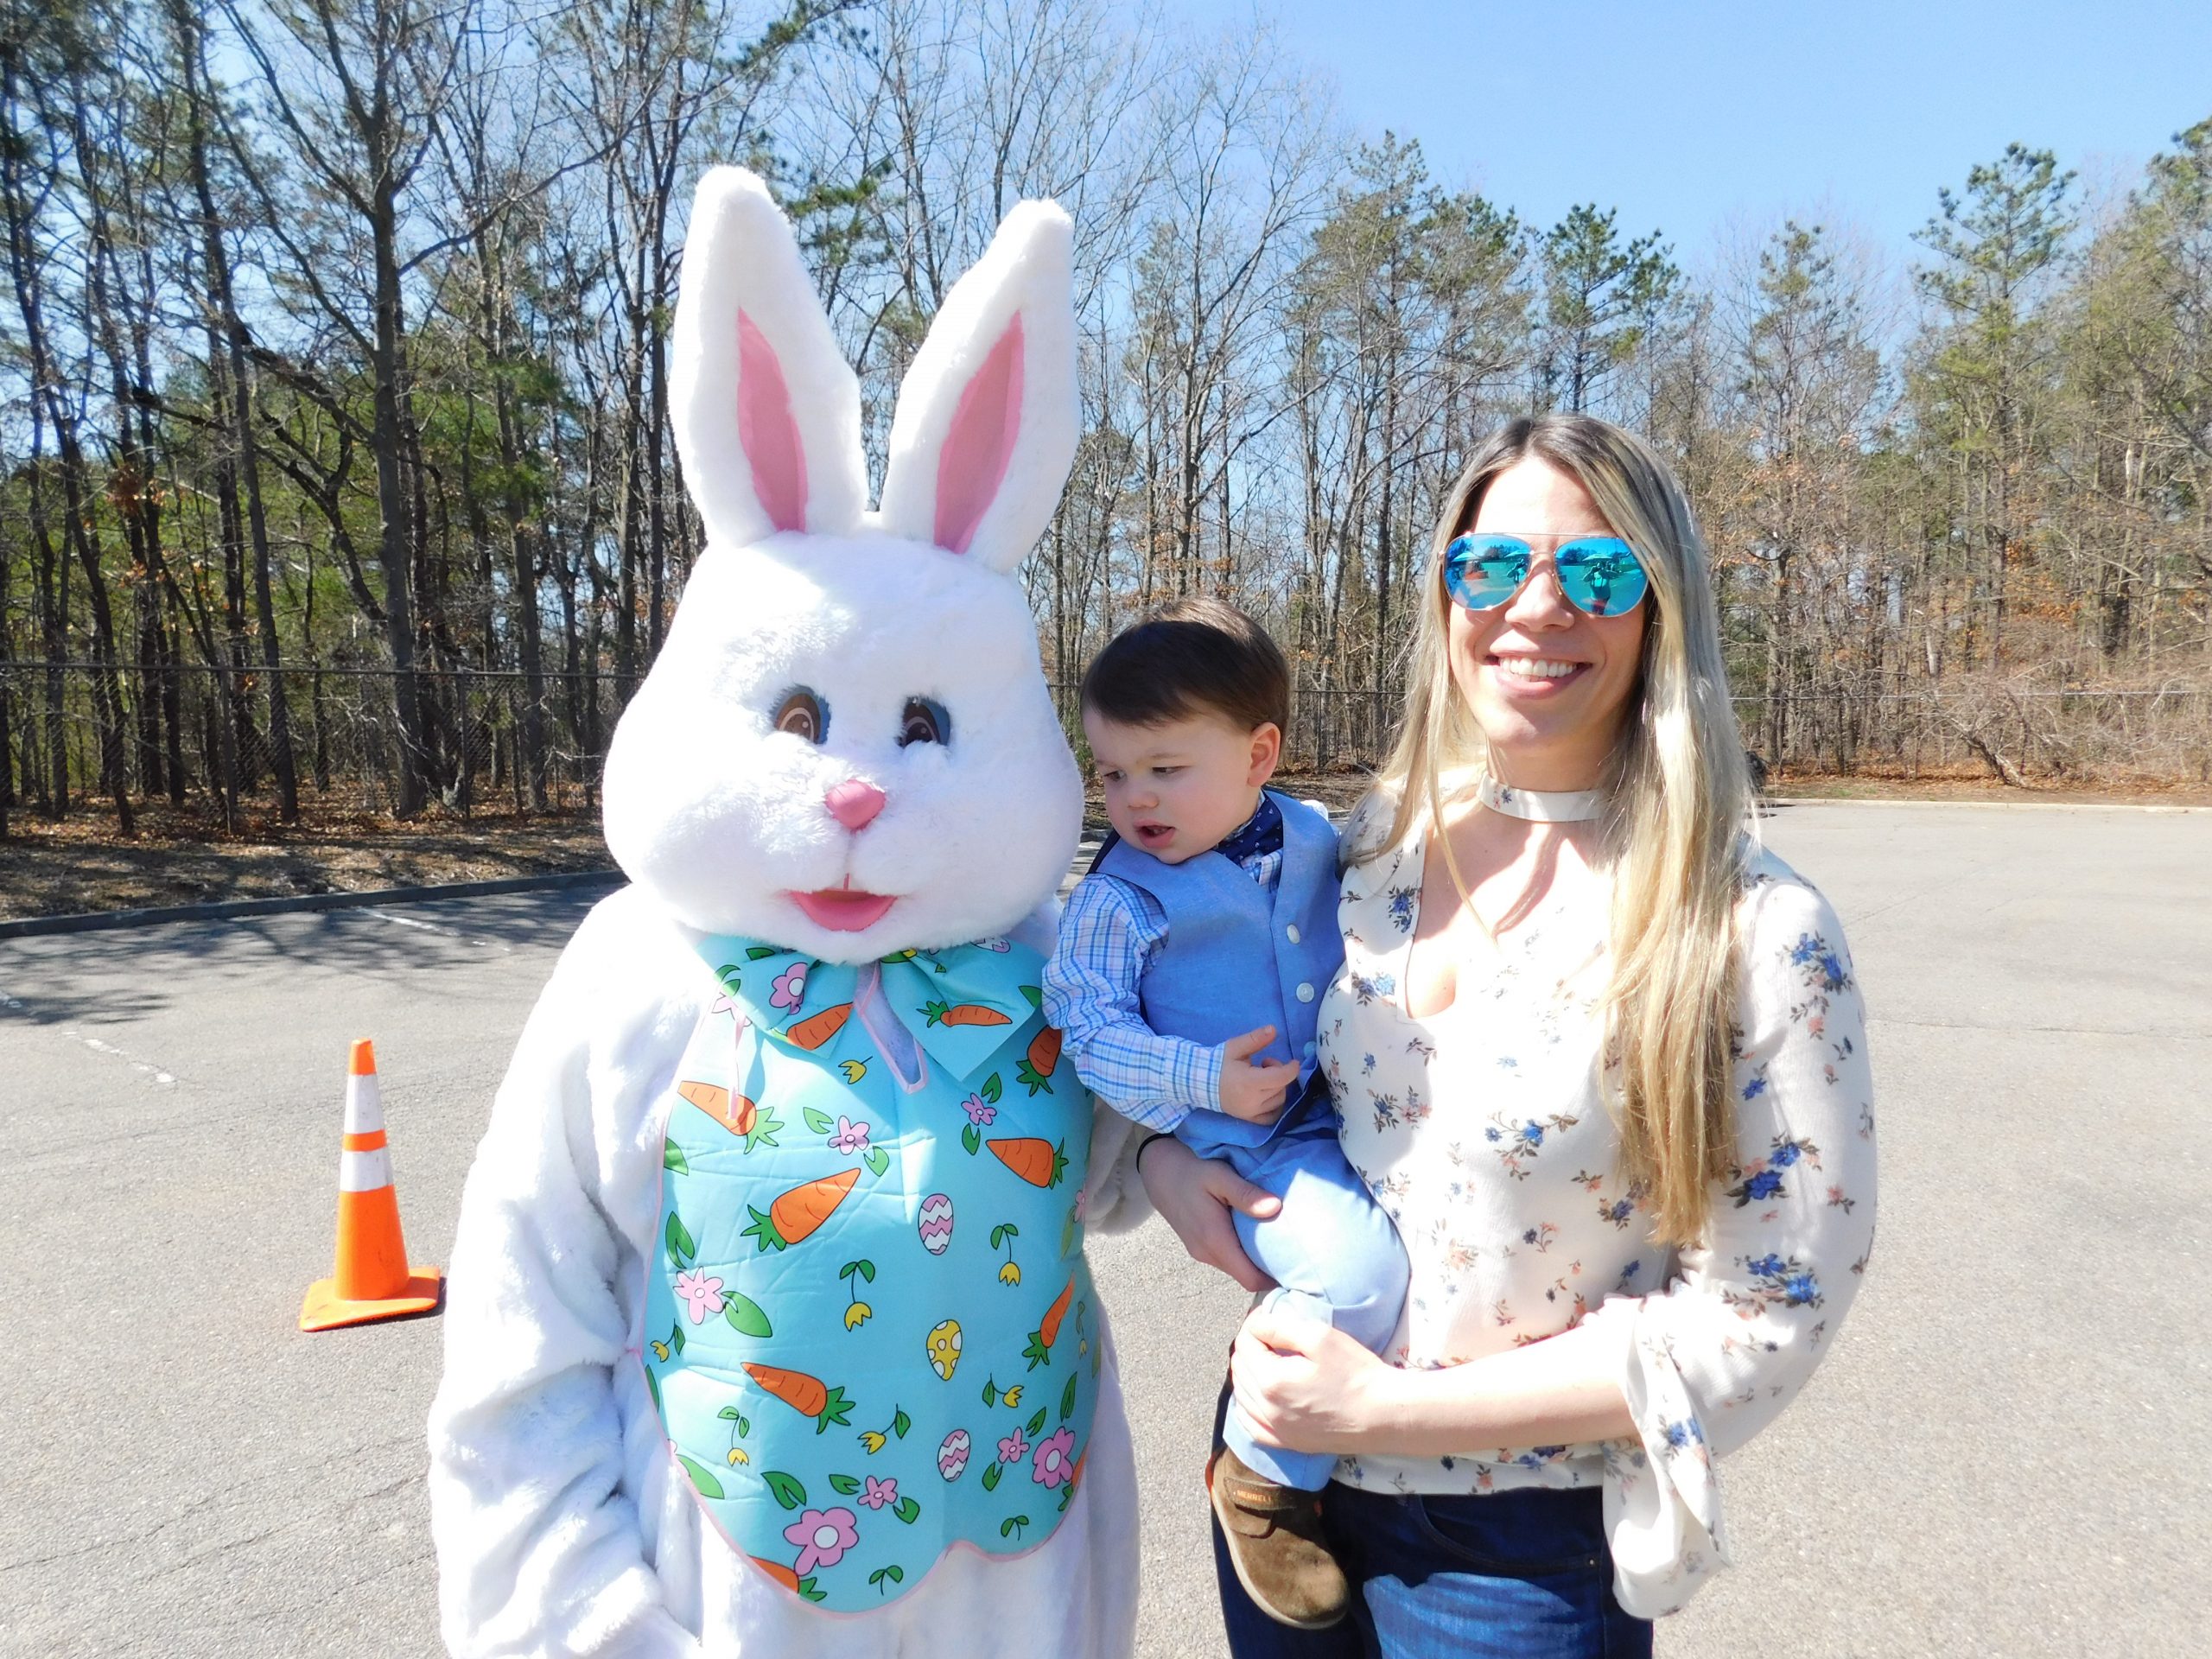 The Easter Bunny poses with some of the residents who attended the “Meet the Easter Bunny” event at Islandia Village Hall on March 27.